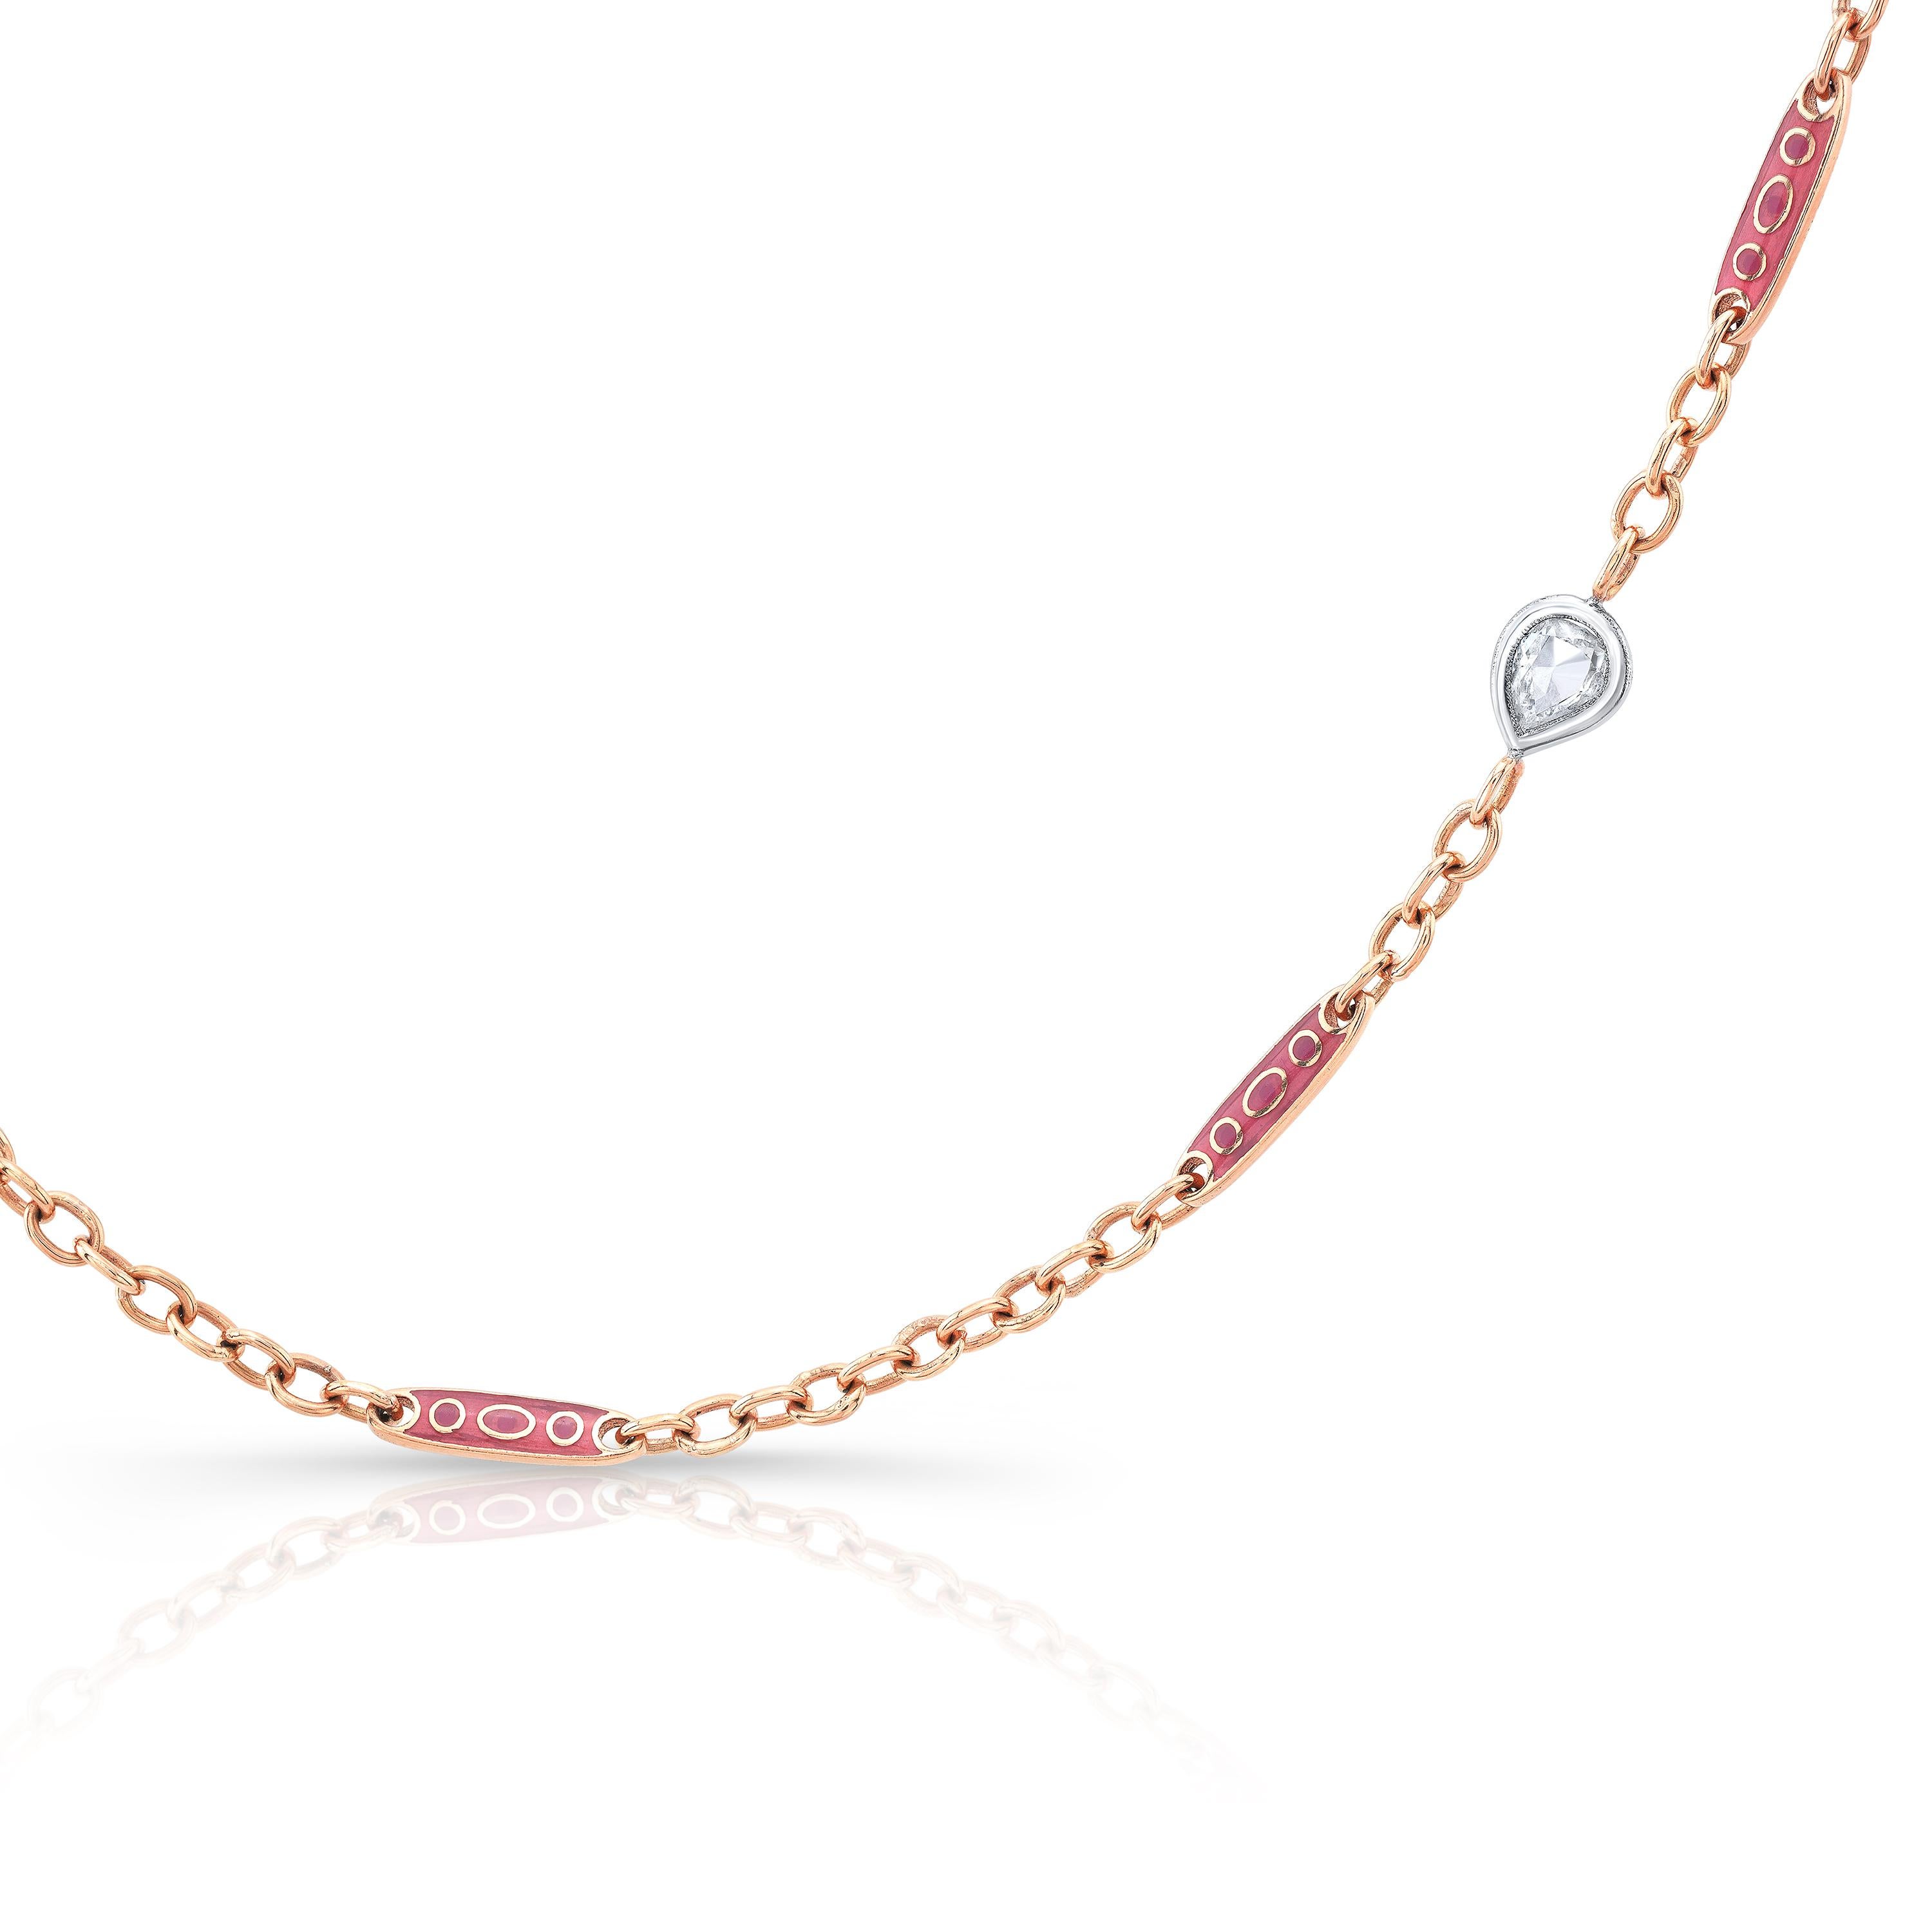 Amy Y's 18K-rose gold, diamond, and hand-painted enamel contemporary 22